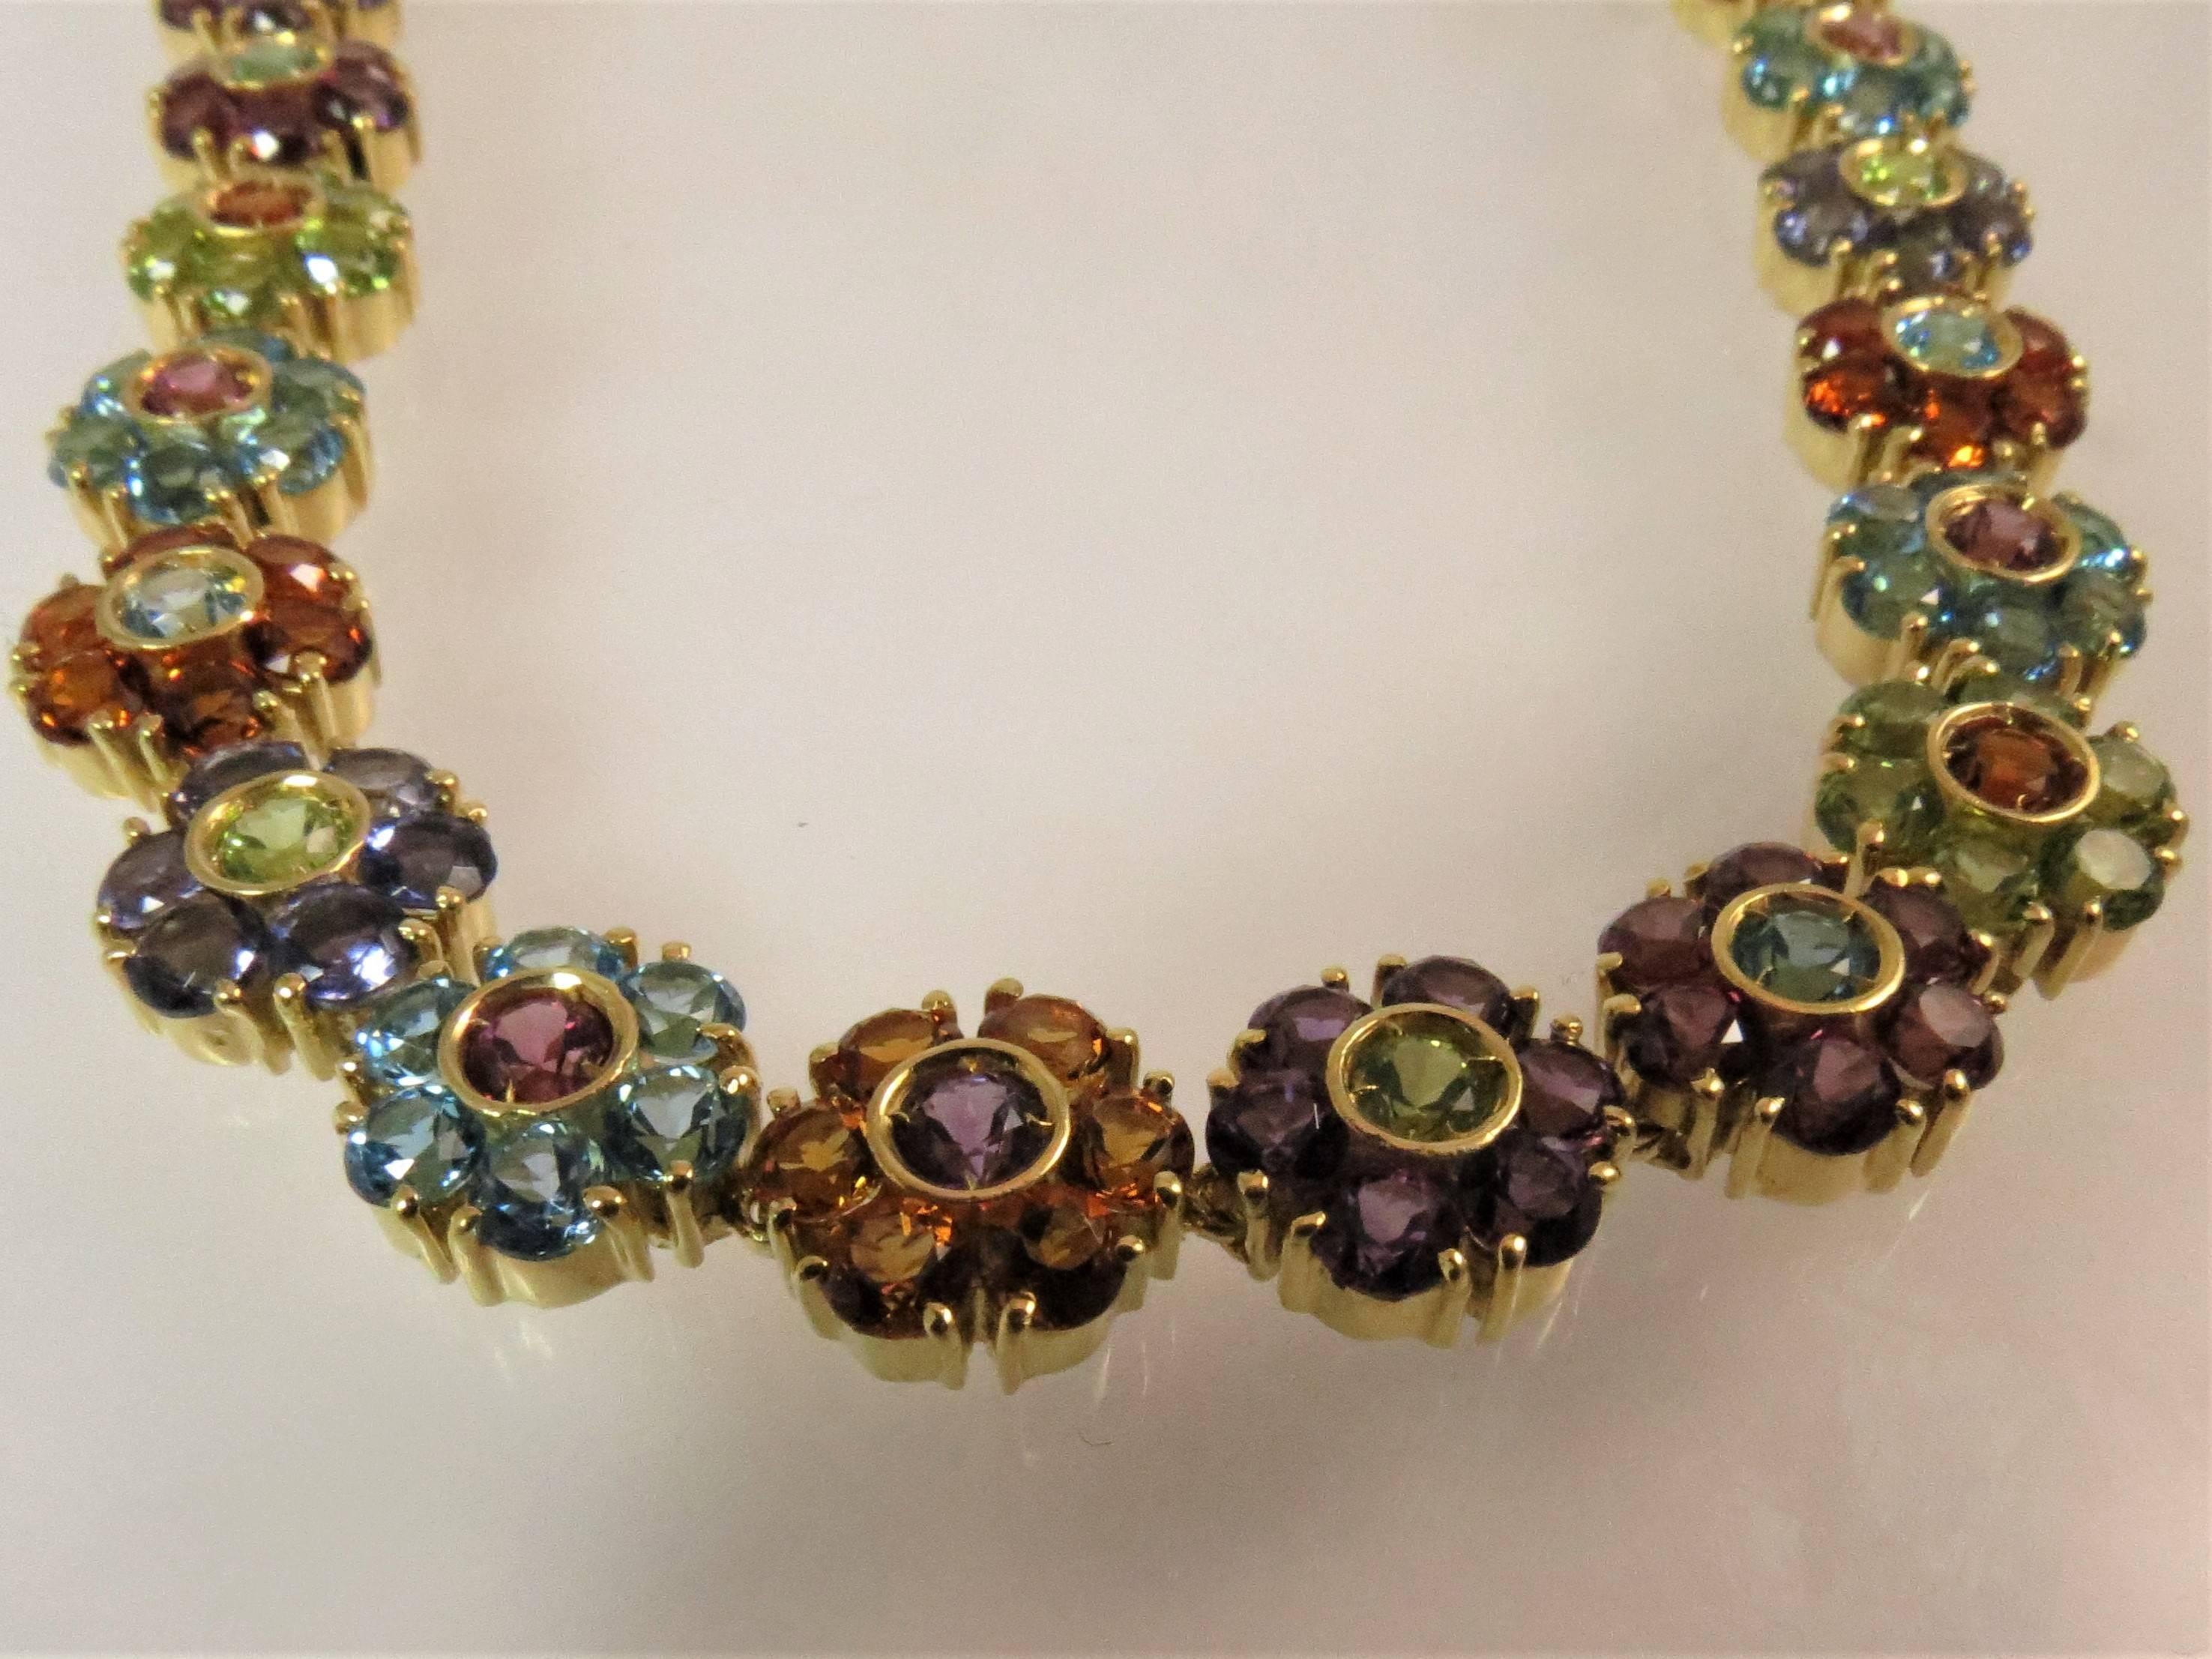 18K yellow gold multi-colored flower design necklace set with 266 round faceted amethyst, blue topaz, citrine, iolite, peridot, and pink tourmaline. 
Length is 16.5 inches
Diameter of flowers are .38 inches